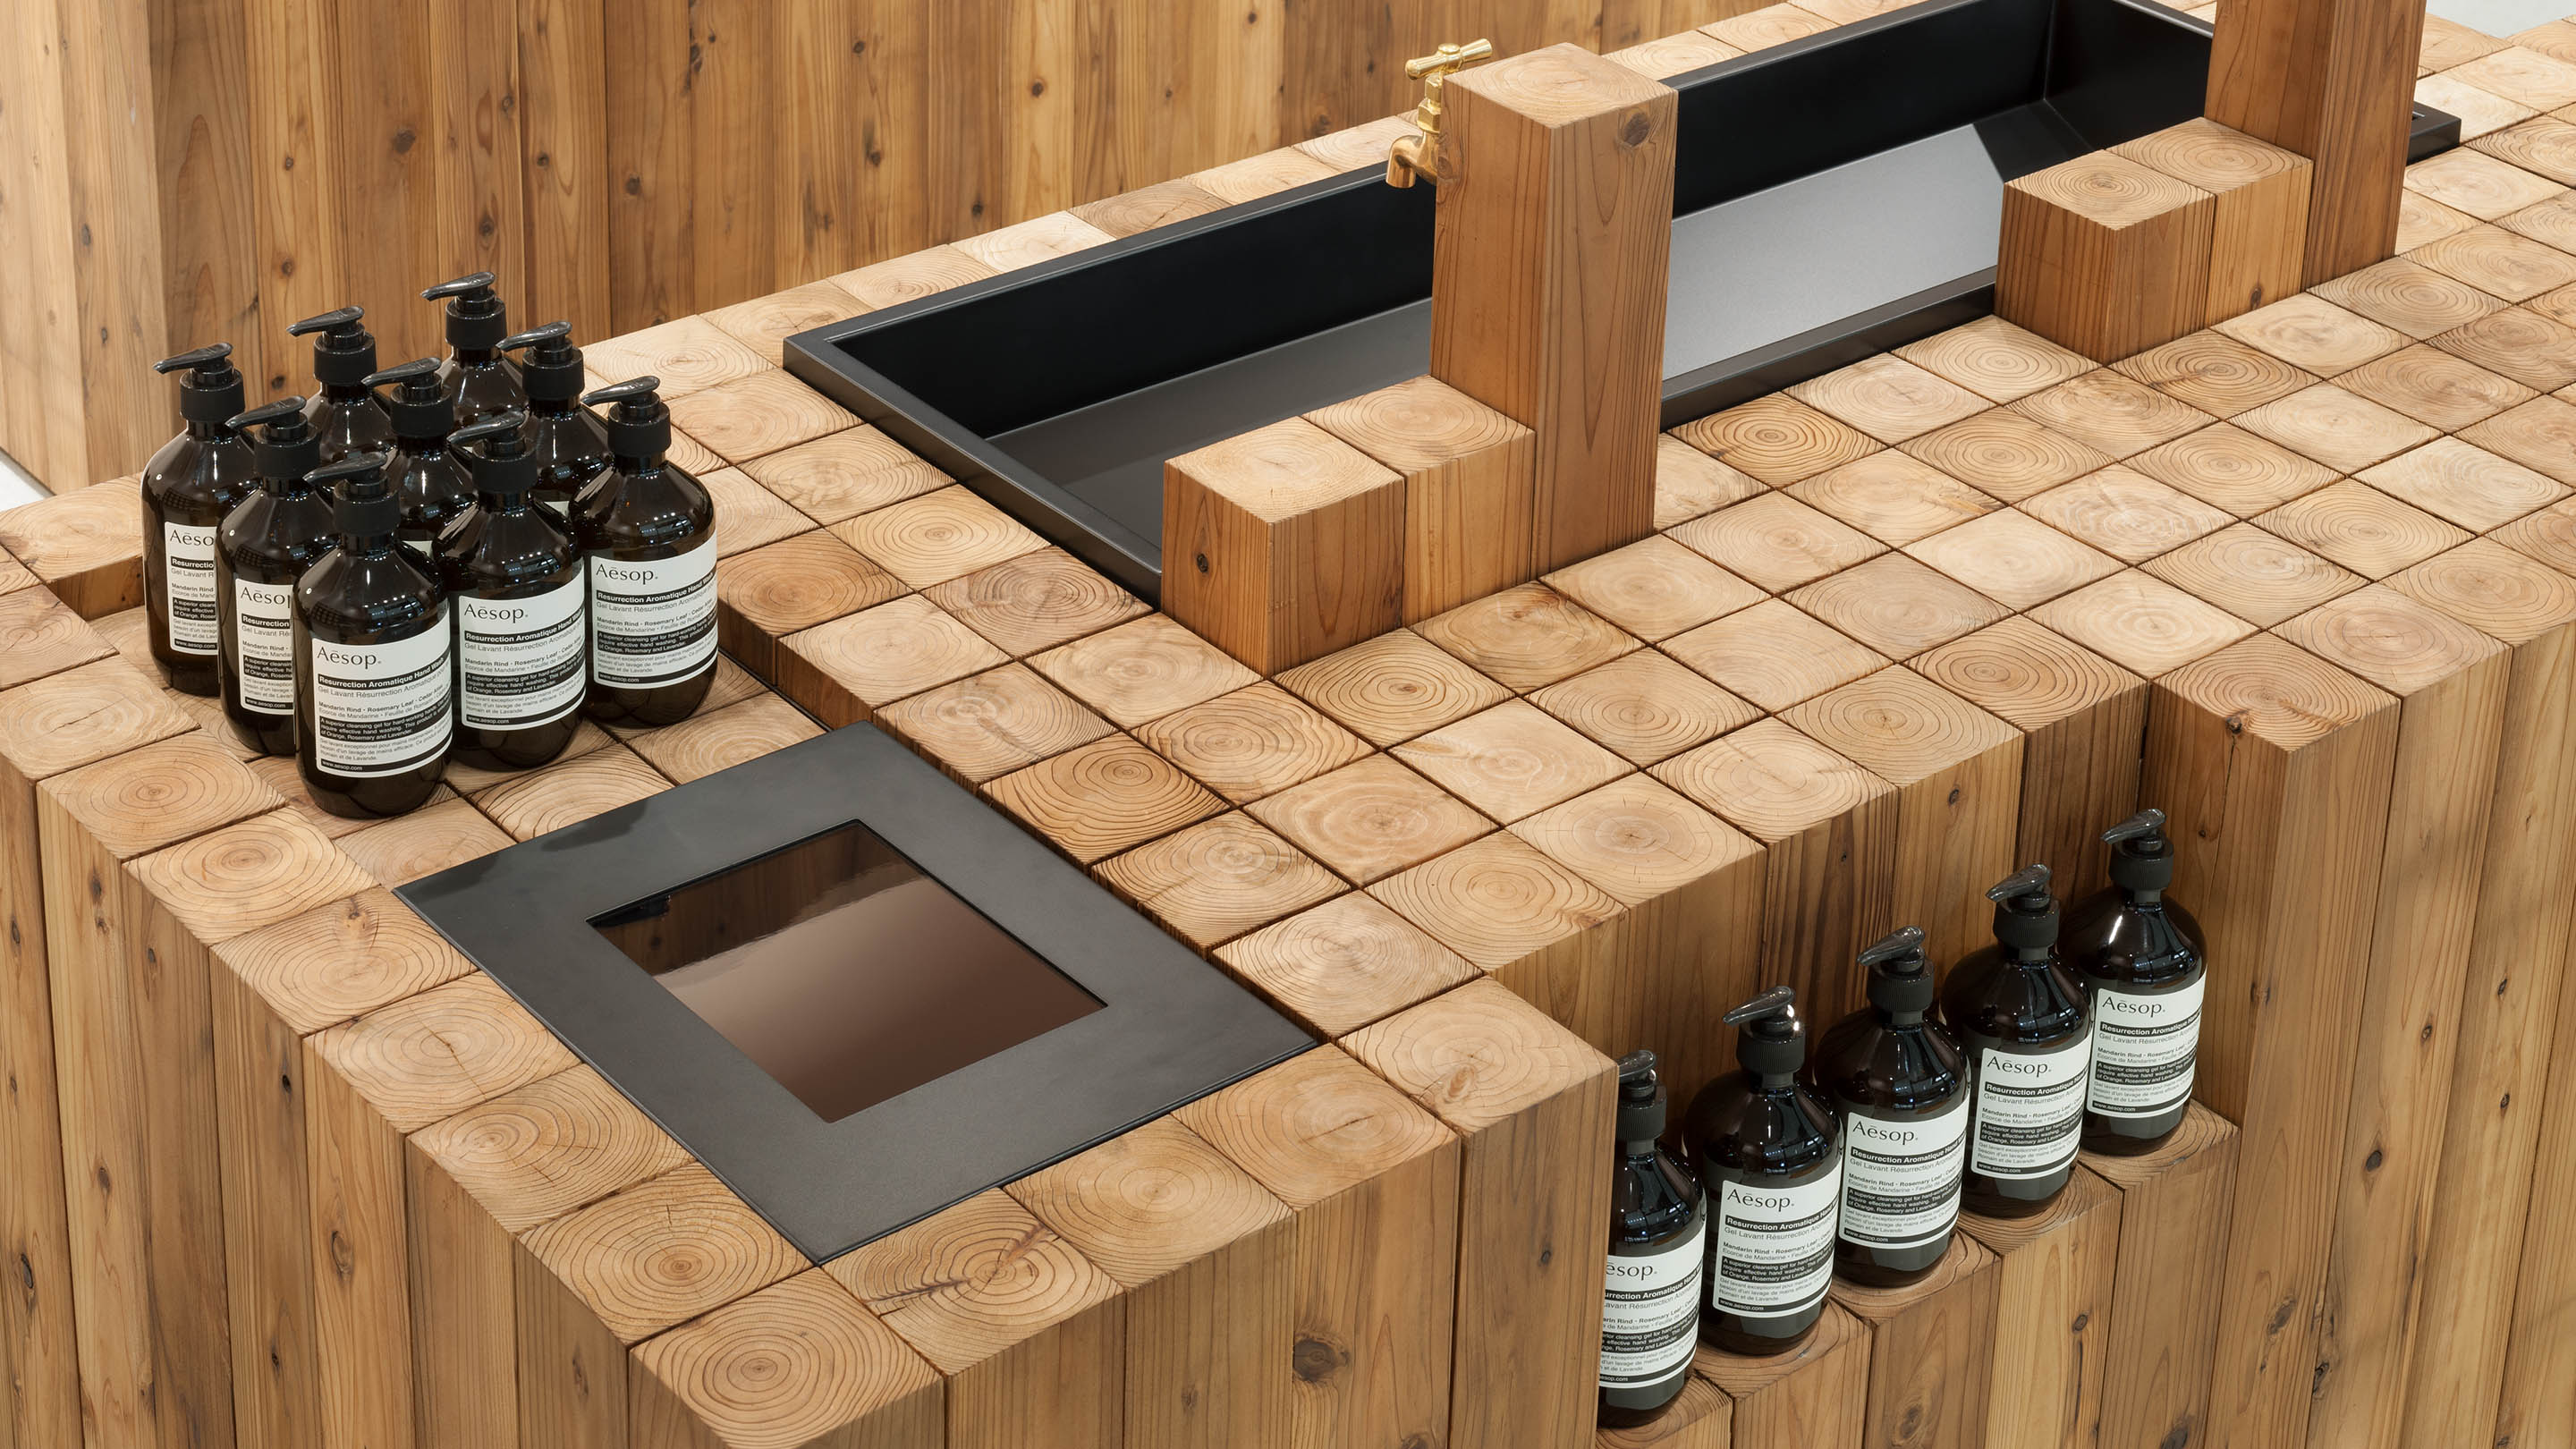 Aesop products on a square basin